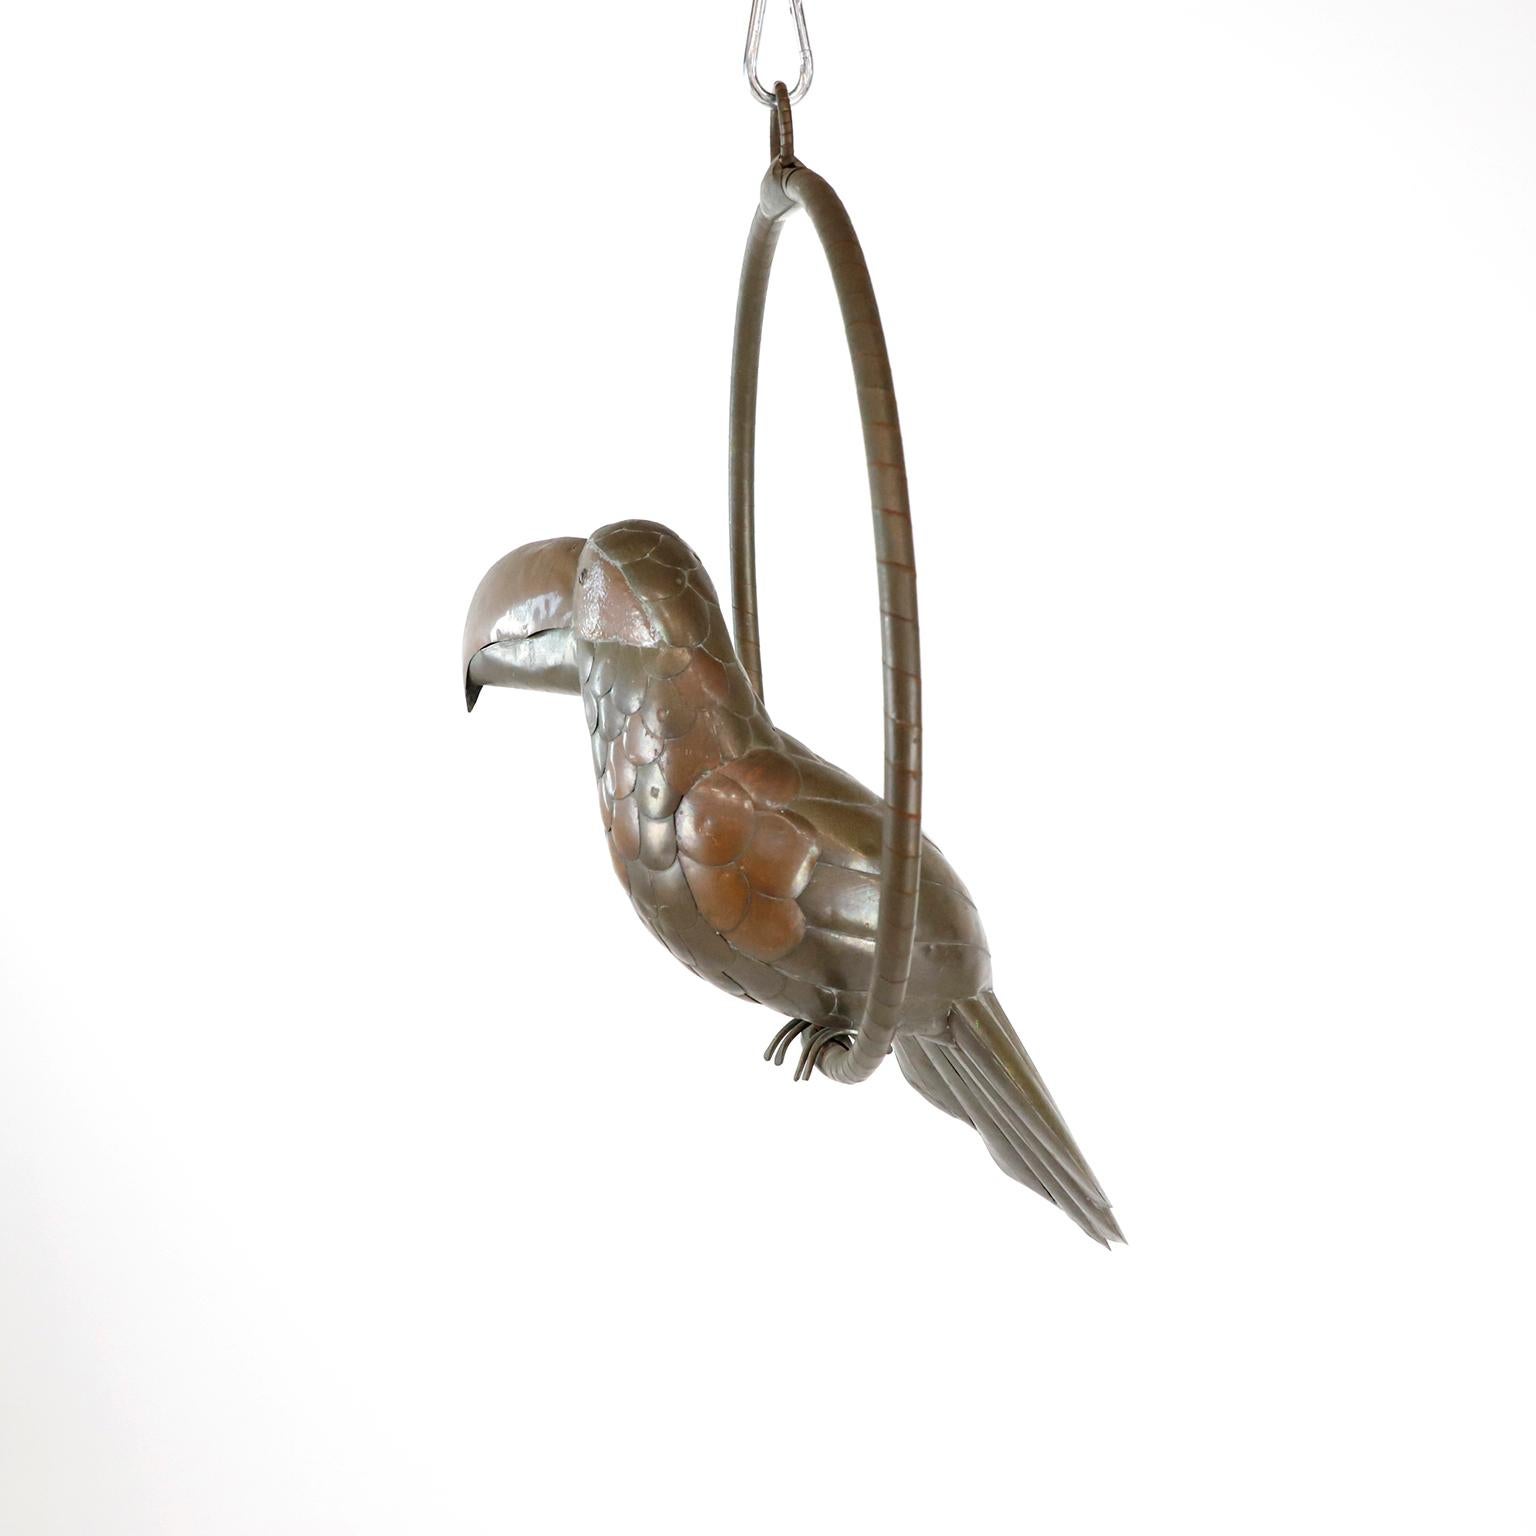 We offer this toucan sculpture by Mexican artist Sergio Bustamante, circa 1960 made in brass and copper with fantastic patina. Present some details.